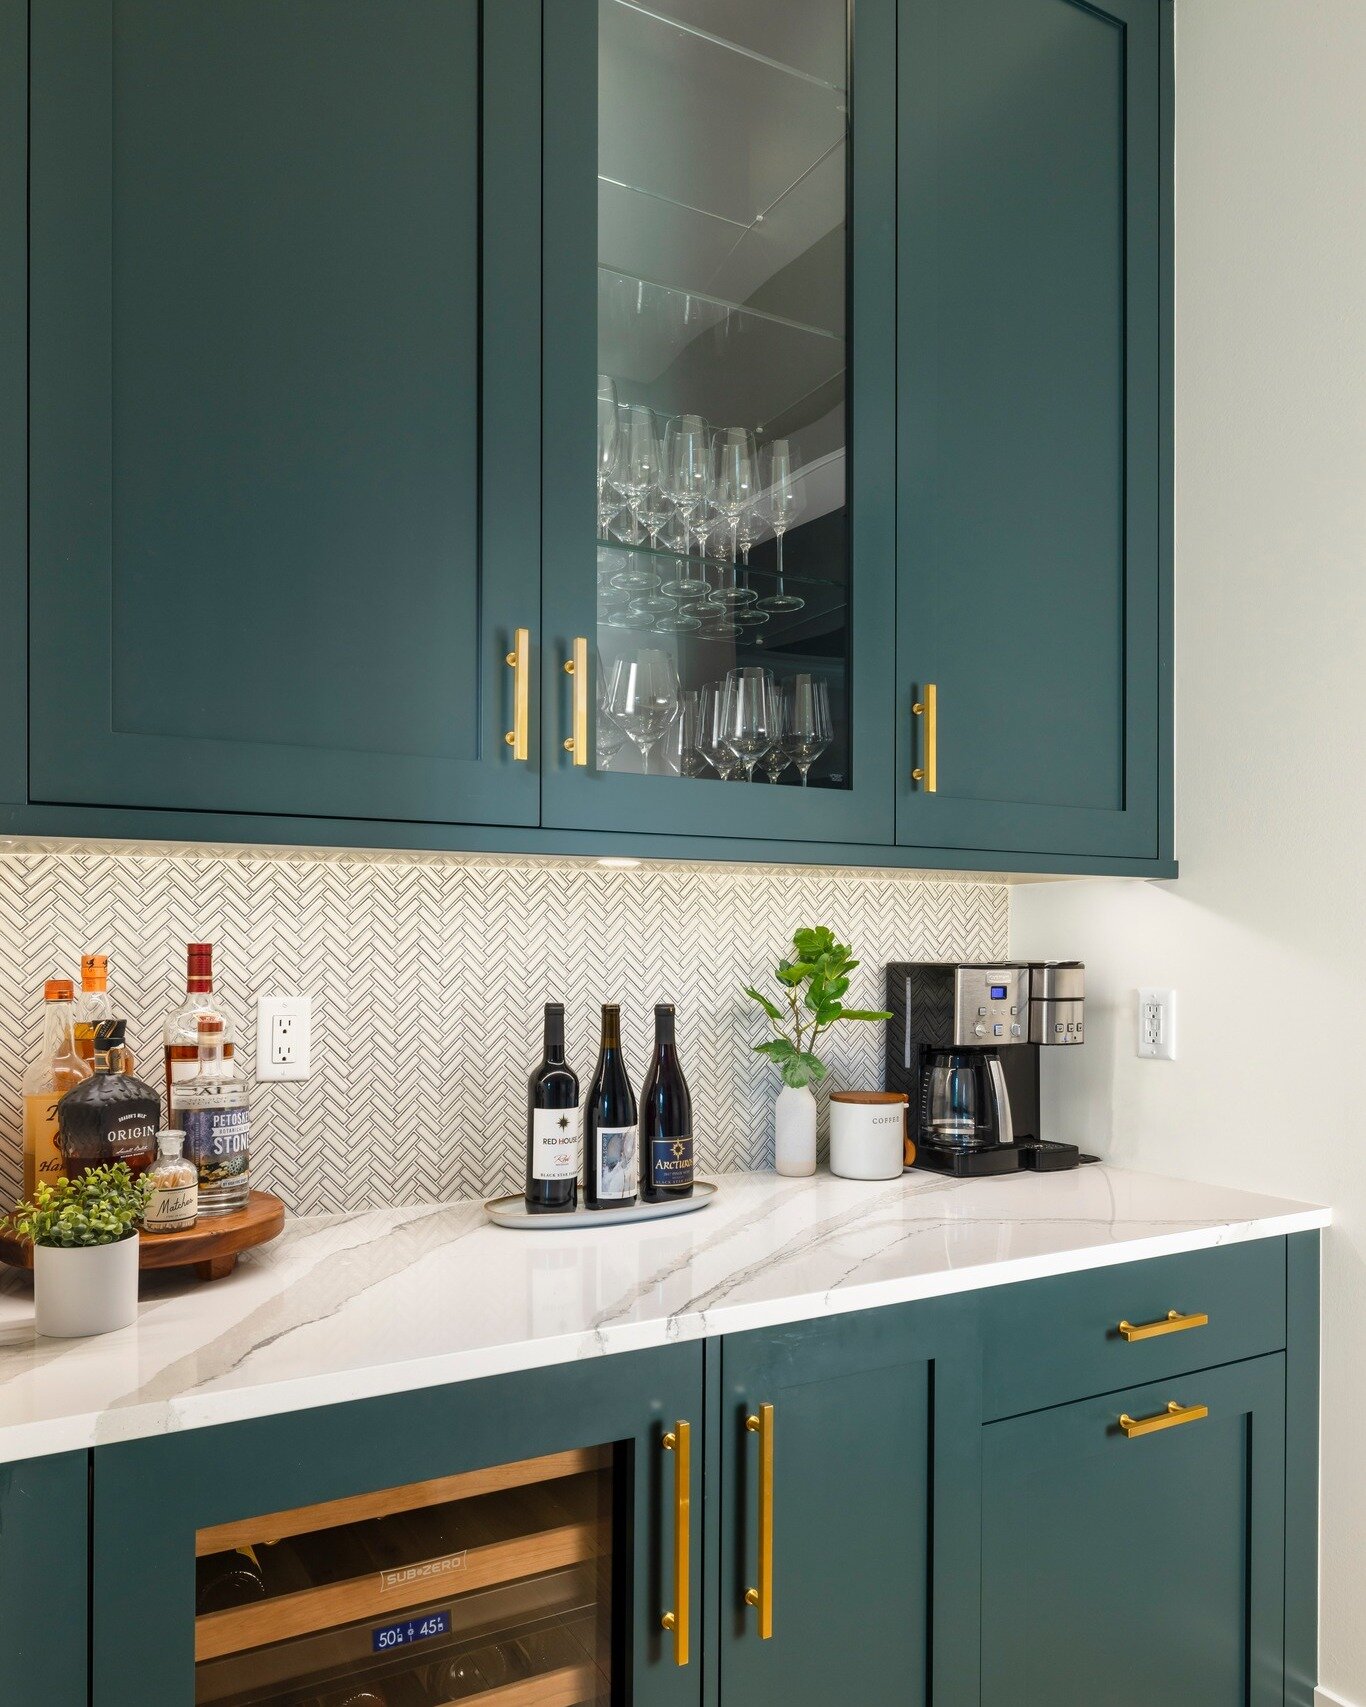 These gorgeous cabinets made at our facility here in Holland, Mi. are stocked for all your springtime cravings - from cozy coffee mornings to chill wine evenings and refreshing cocktails under the stars. Cheers to endless spring sips!

Design: @bench